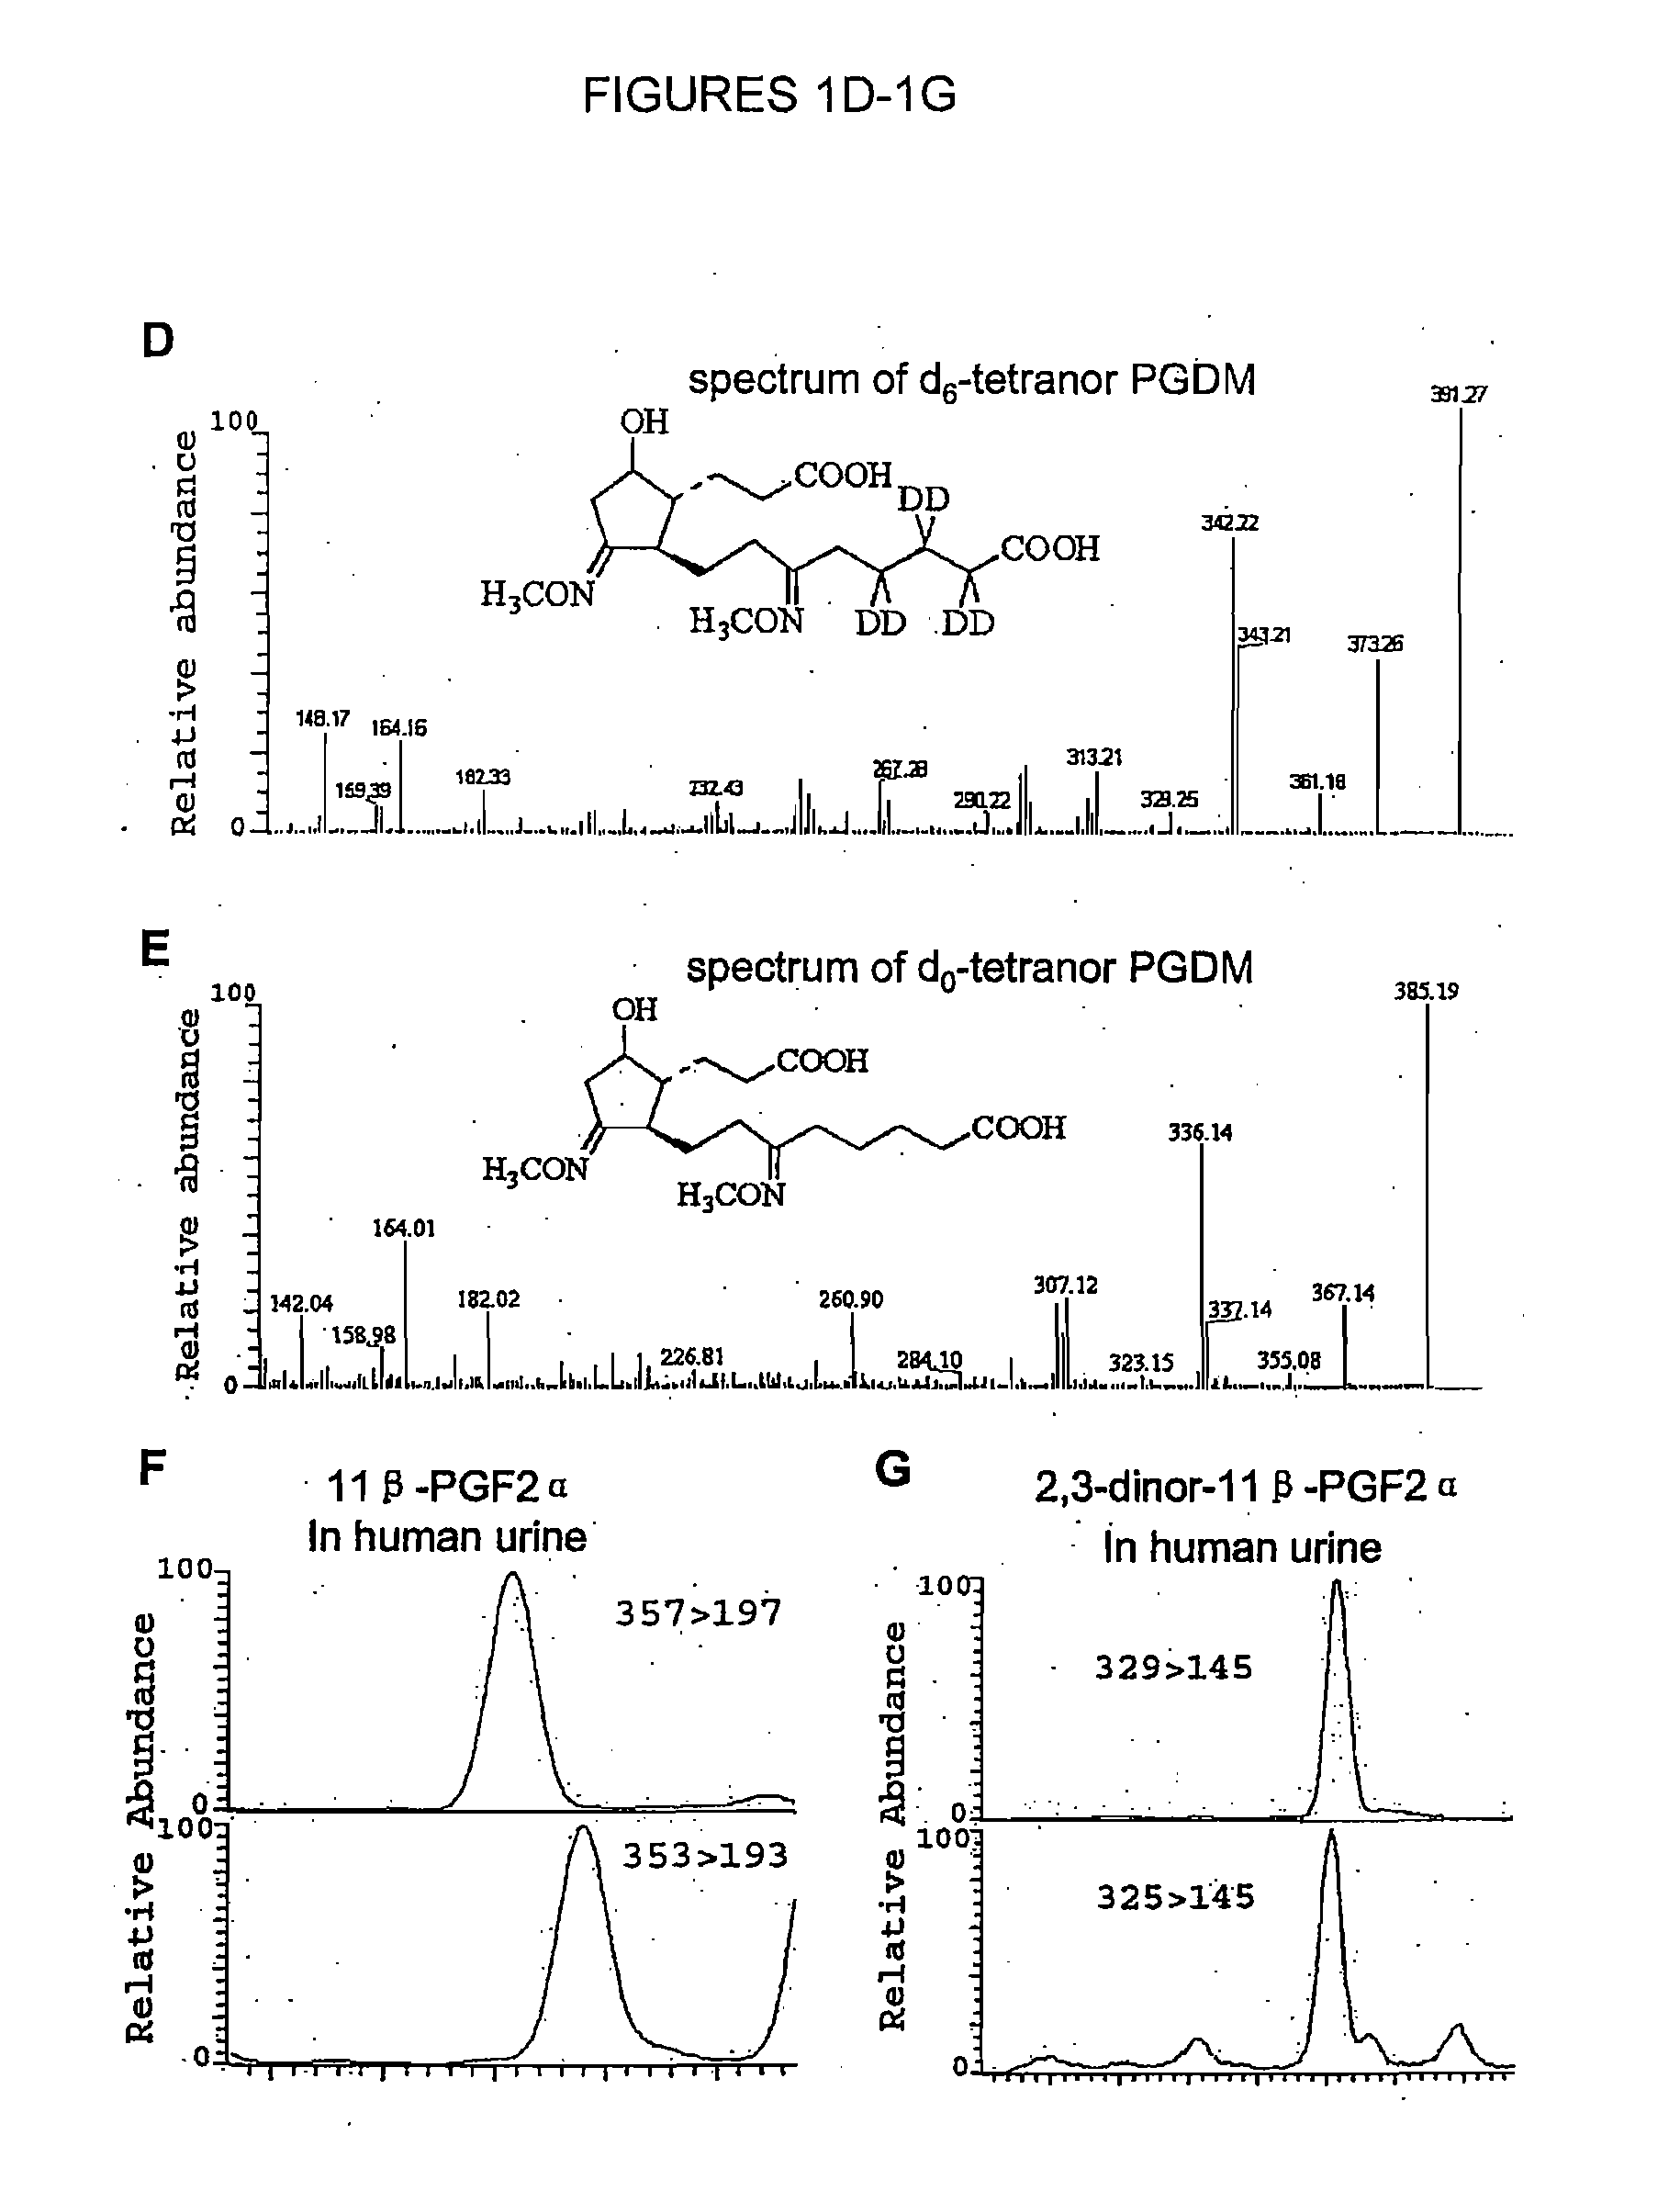 Tetranor PGDM: A Biomarker of PGD2 Synthesis In Vivo